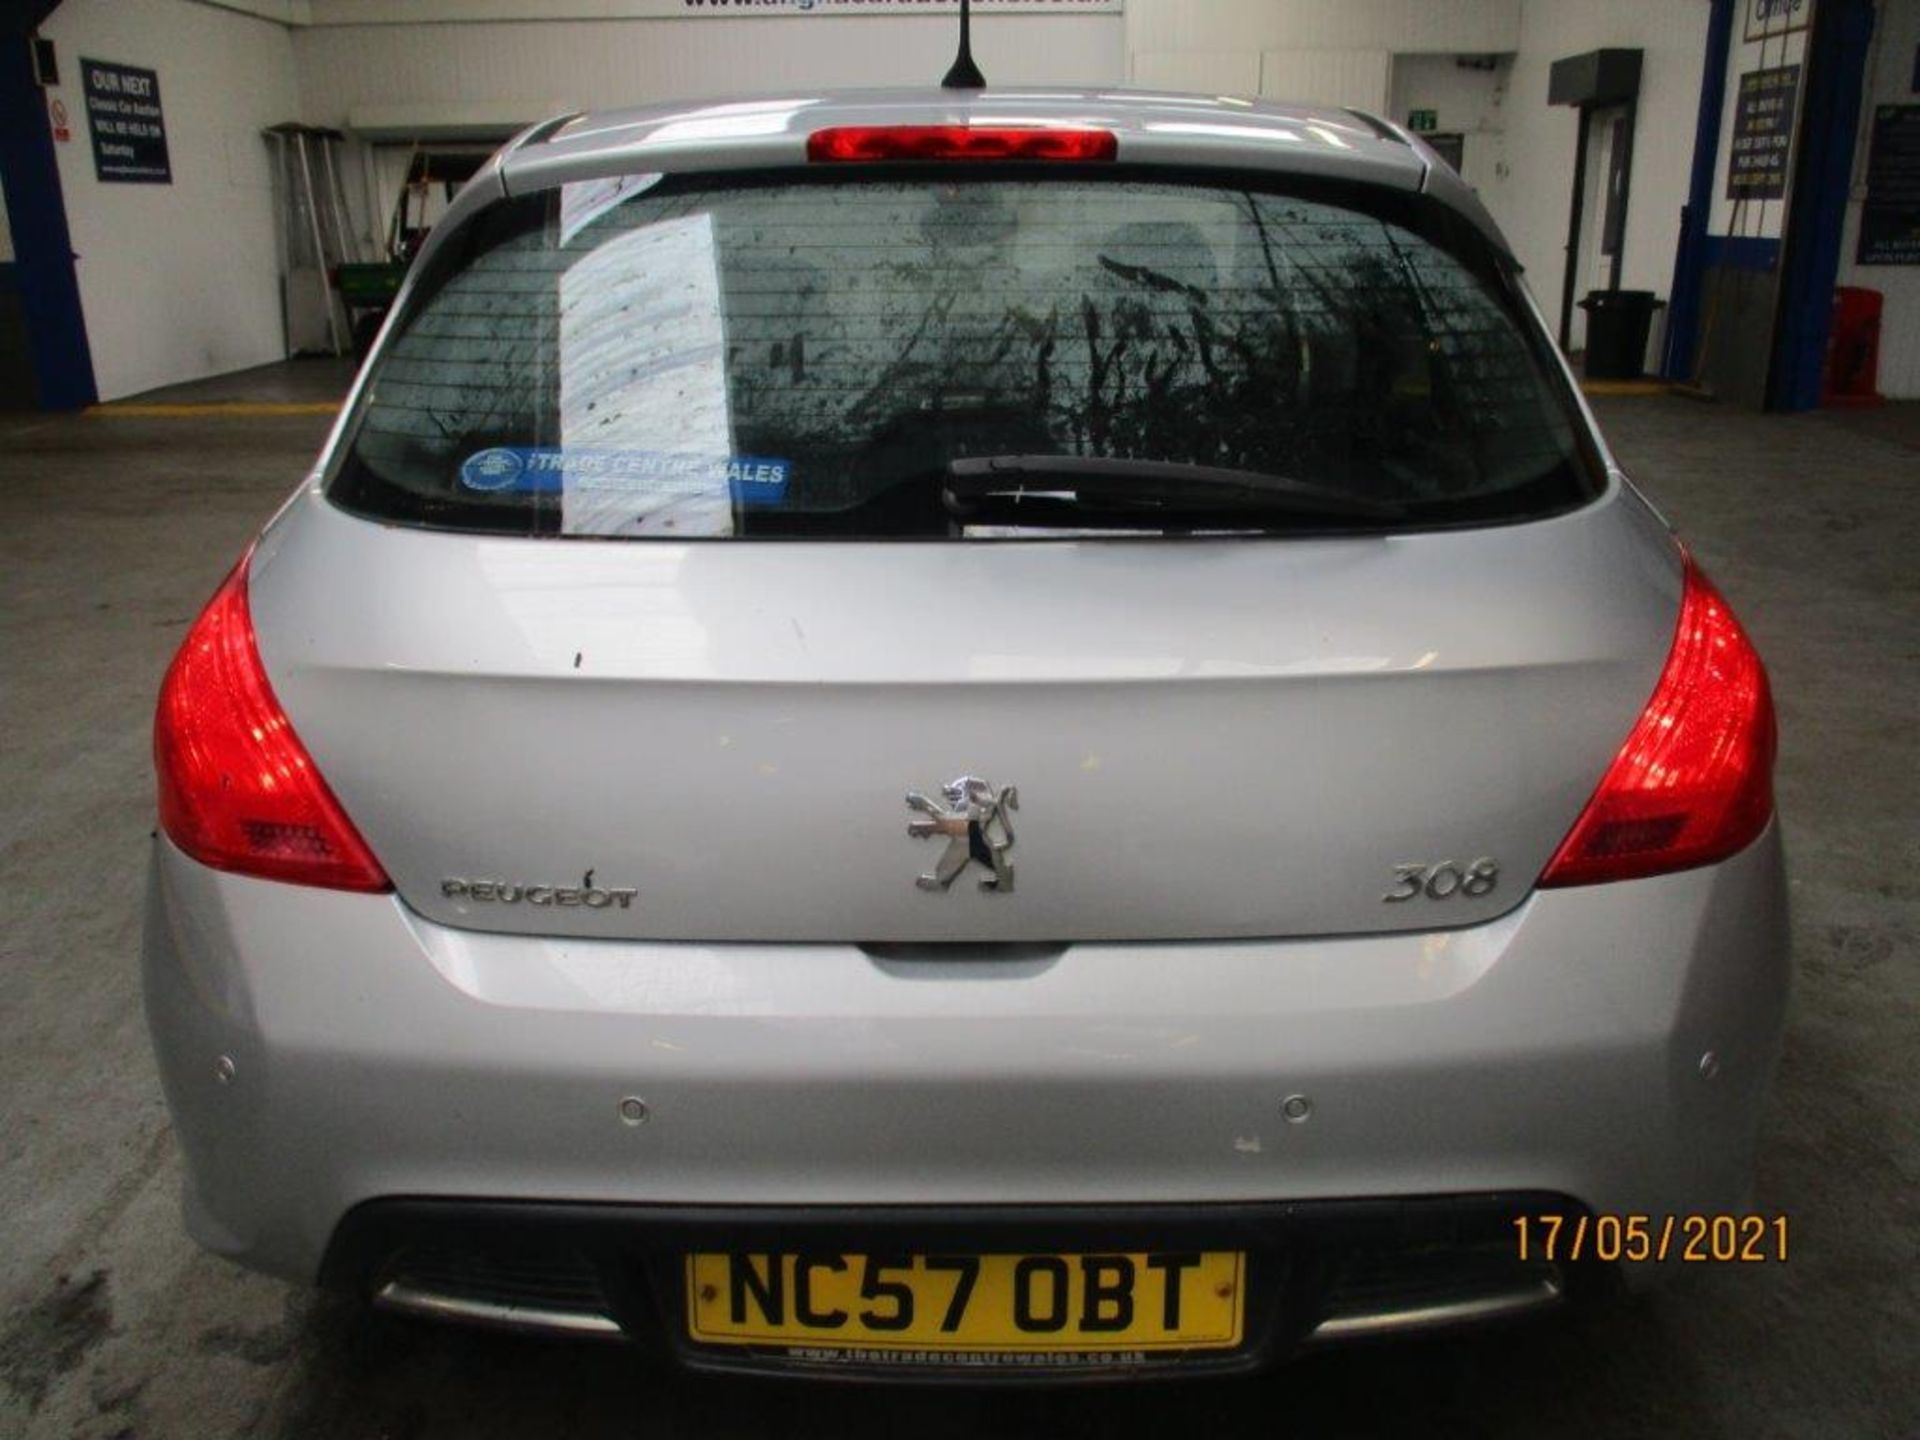 57 07 Peugeot 308 GT HDI - Image 3 of 20